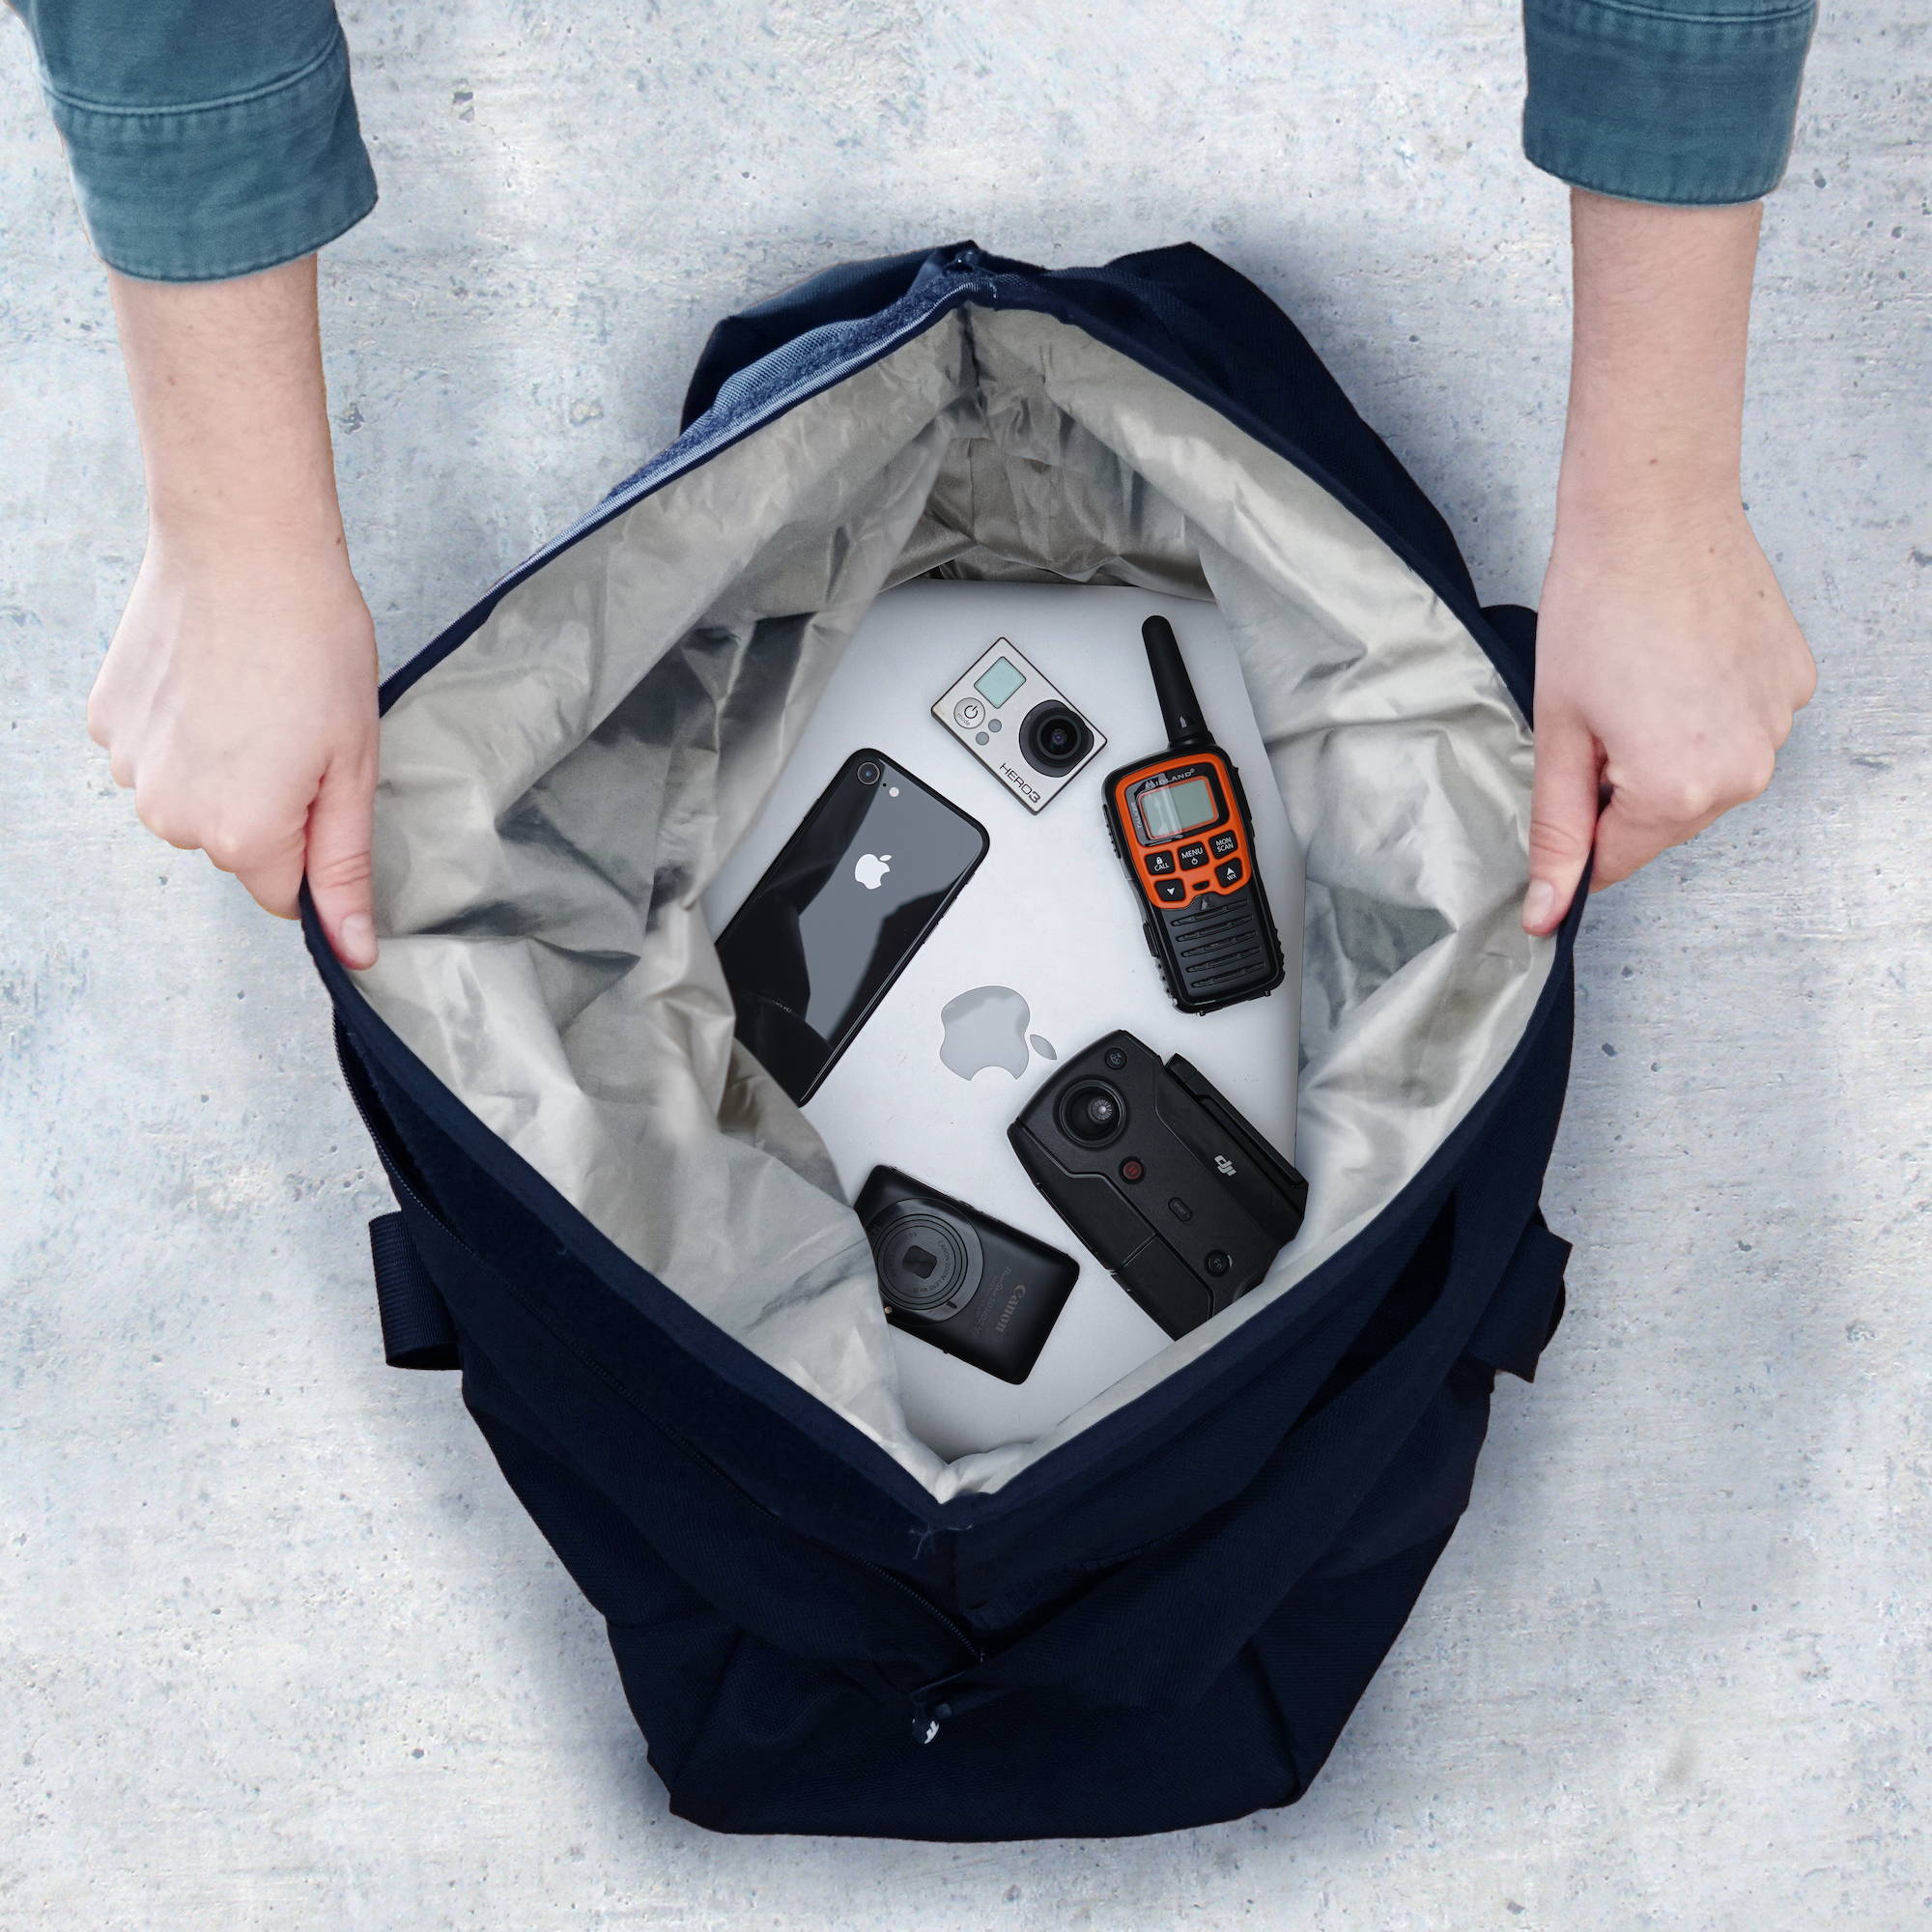 mission darkness x2 faraday duffel bag blocks wireless signals and electromagnetic radiation